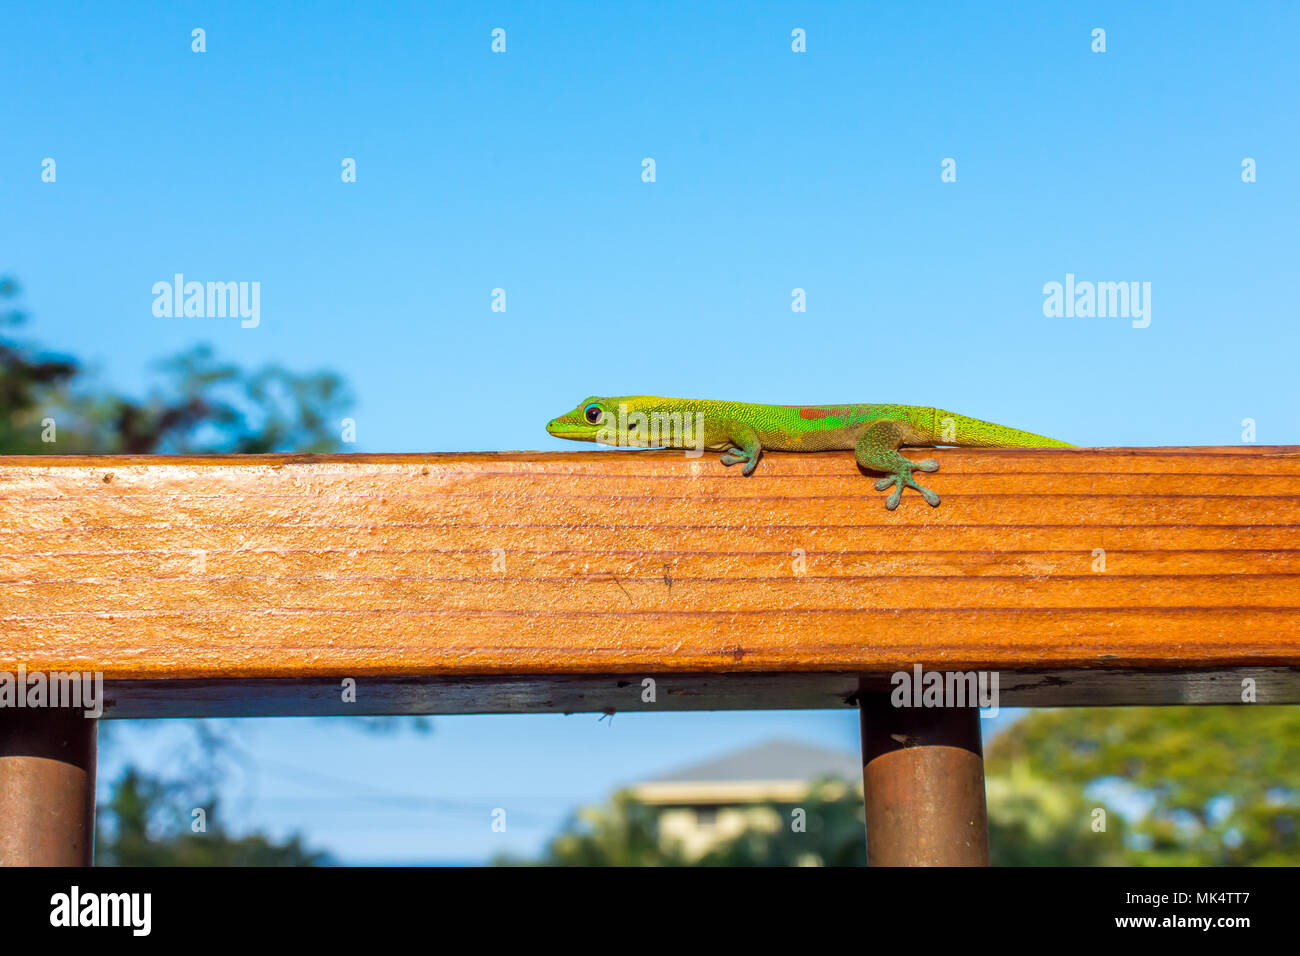 A vibrant green Hawaiian gold dust day gecko perched on a wooden railing, basking in the warm morning sun. Stock Photo